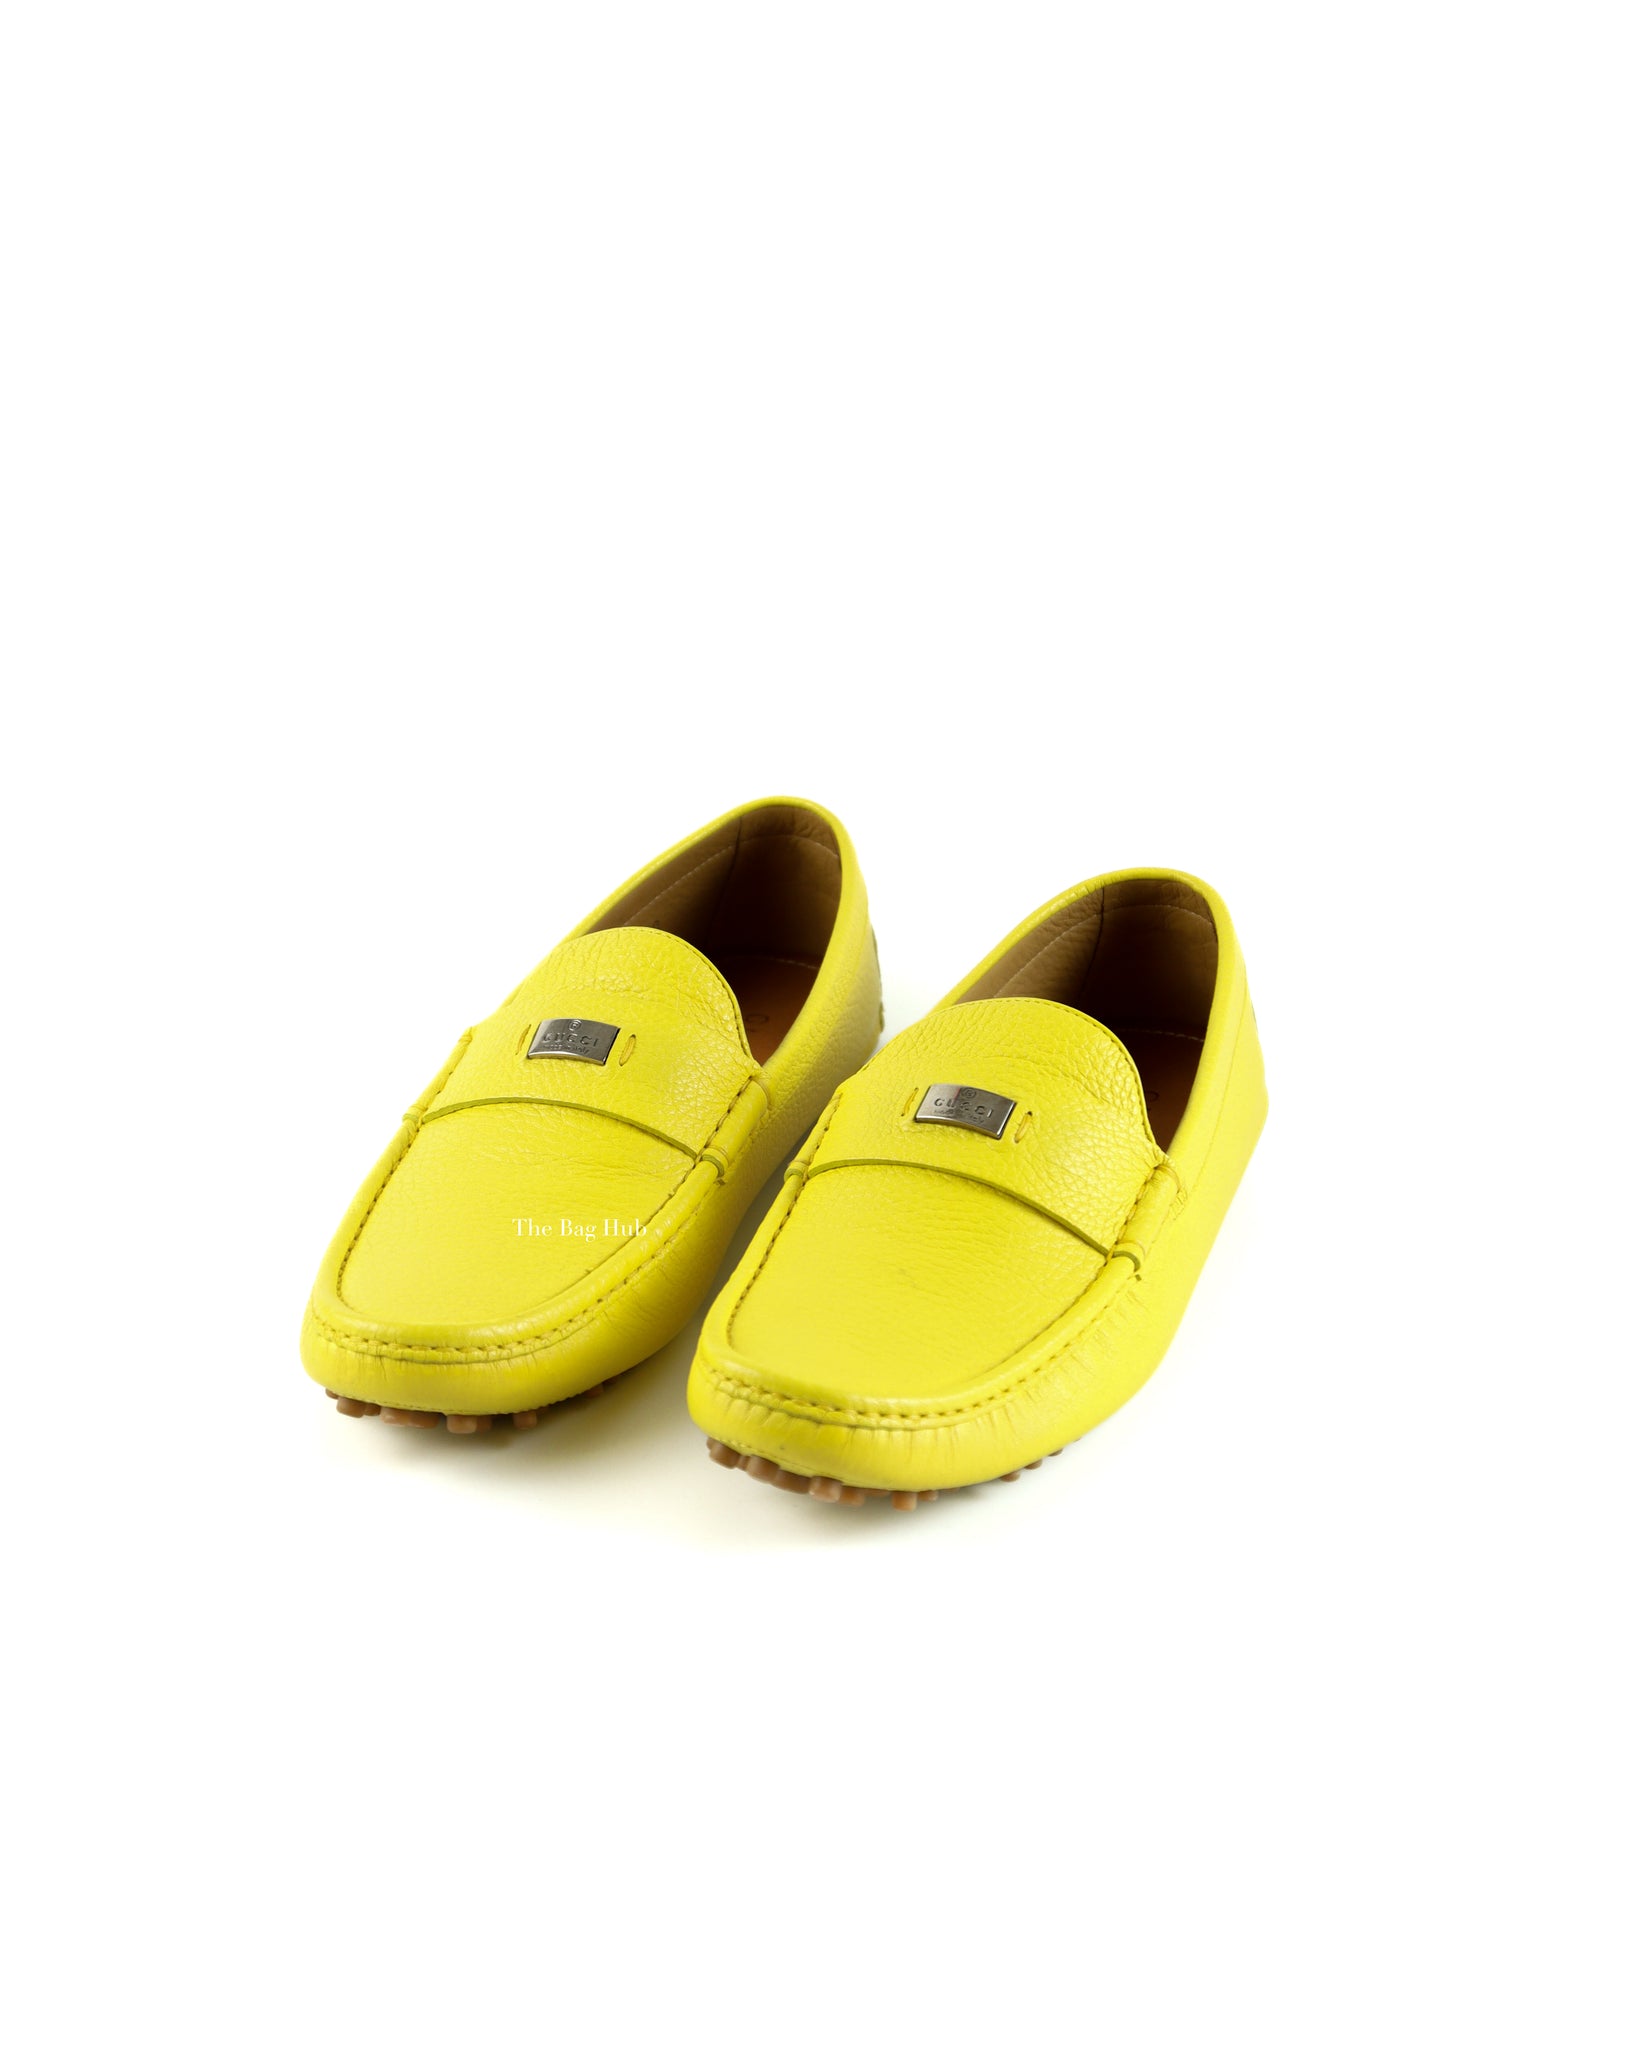 Gucci Yellow New Men's Driving Loafers Size 38.5-2